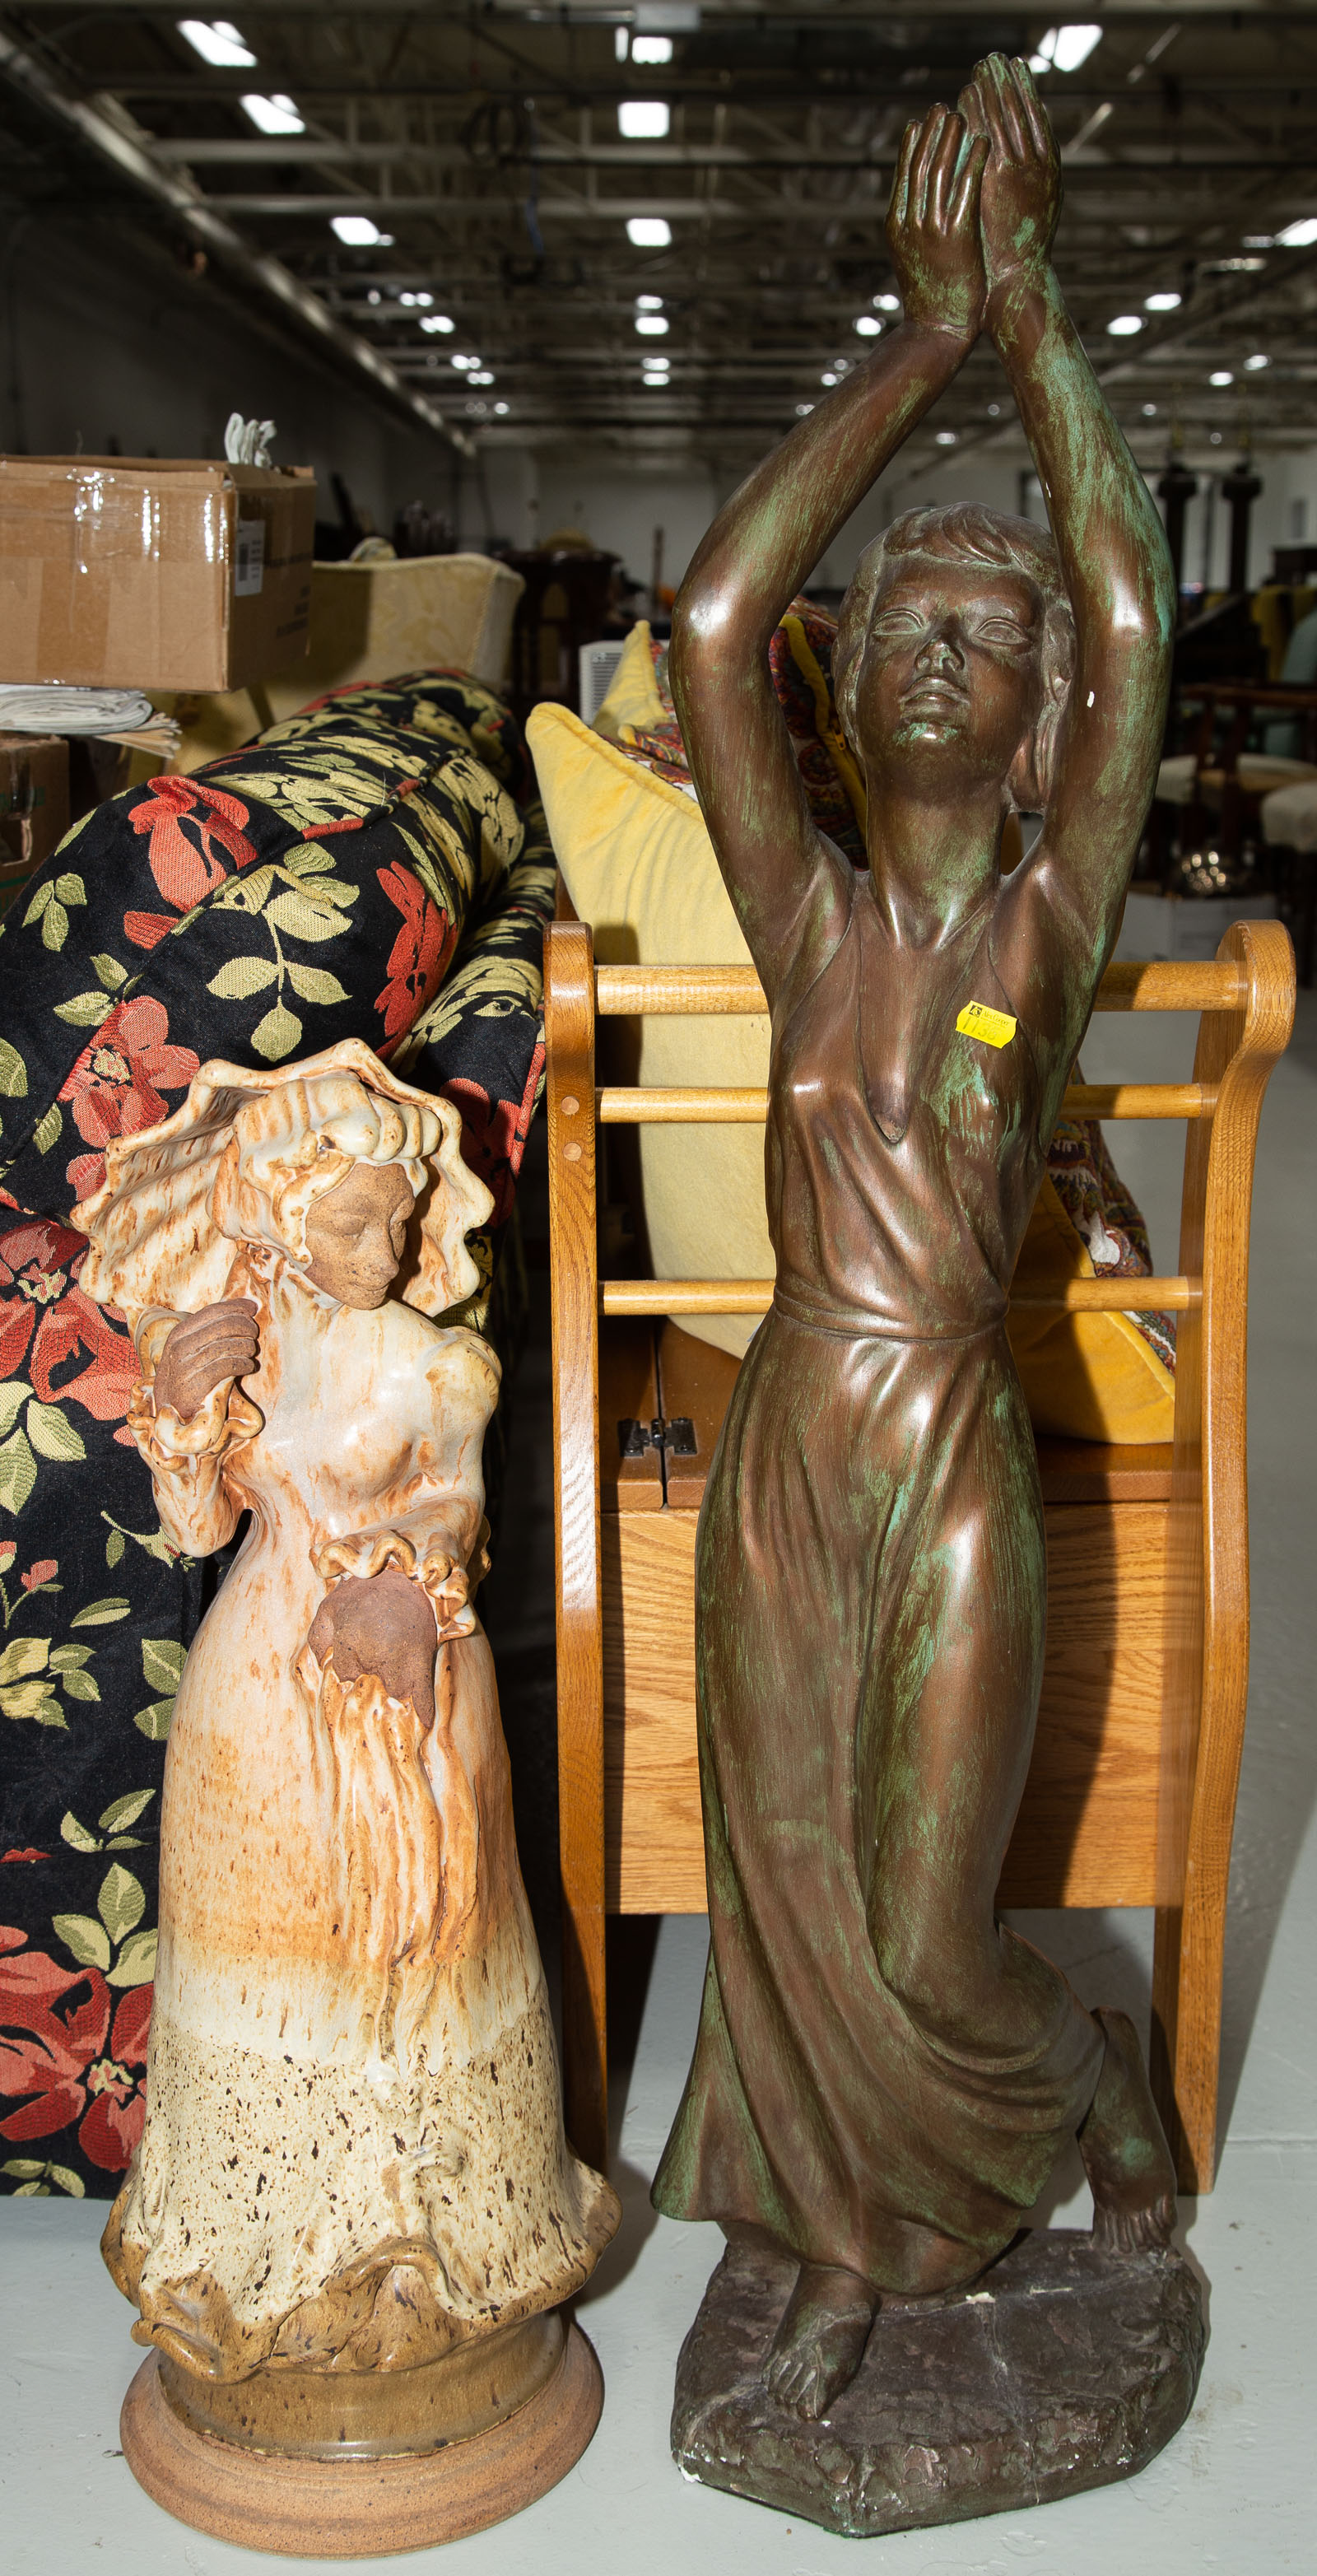 TWO CERAMIC FIGURES OF WOMEN Including 33773a